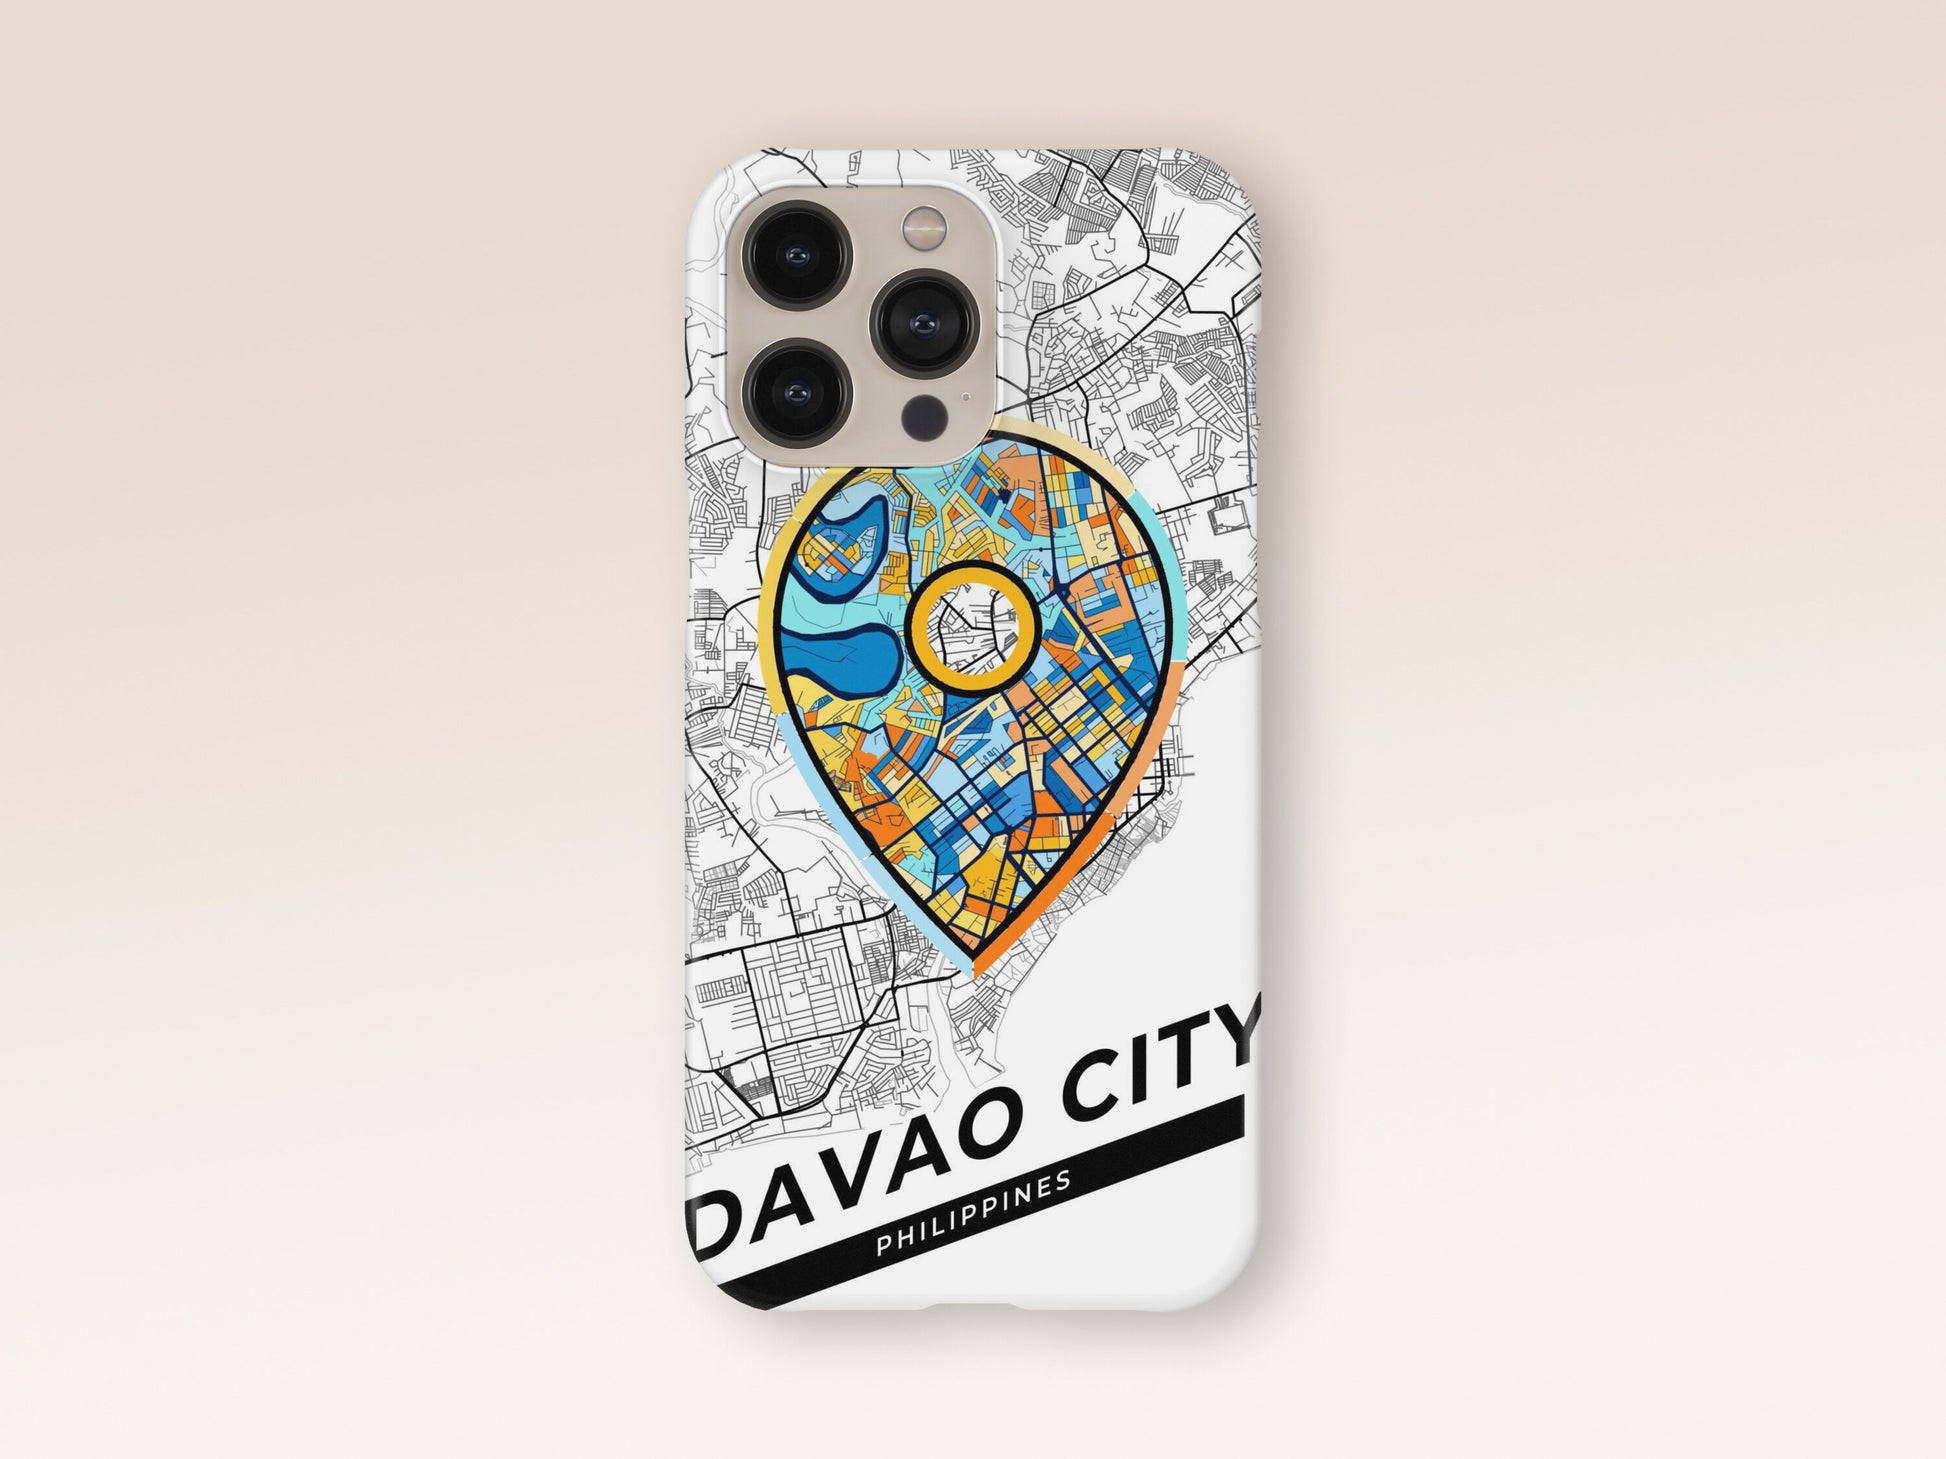 Davao City Philippines slim phone case with colorful icon. Birthday, wedding or housewarming gift. Couple match cases. 1